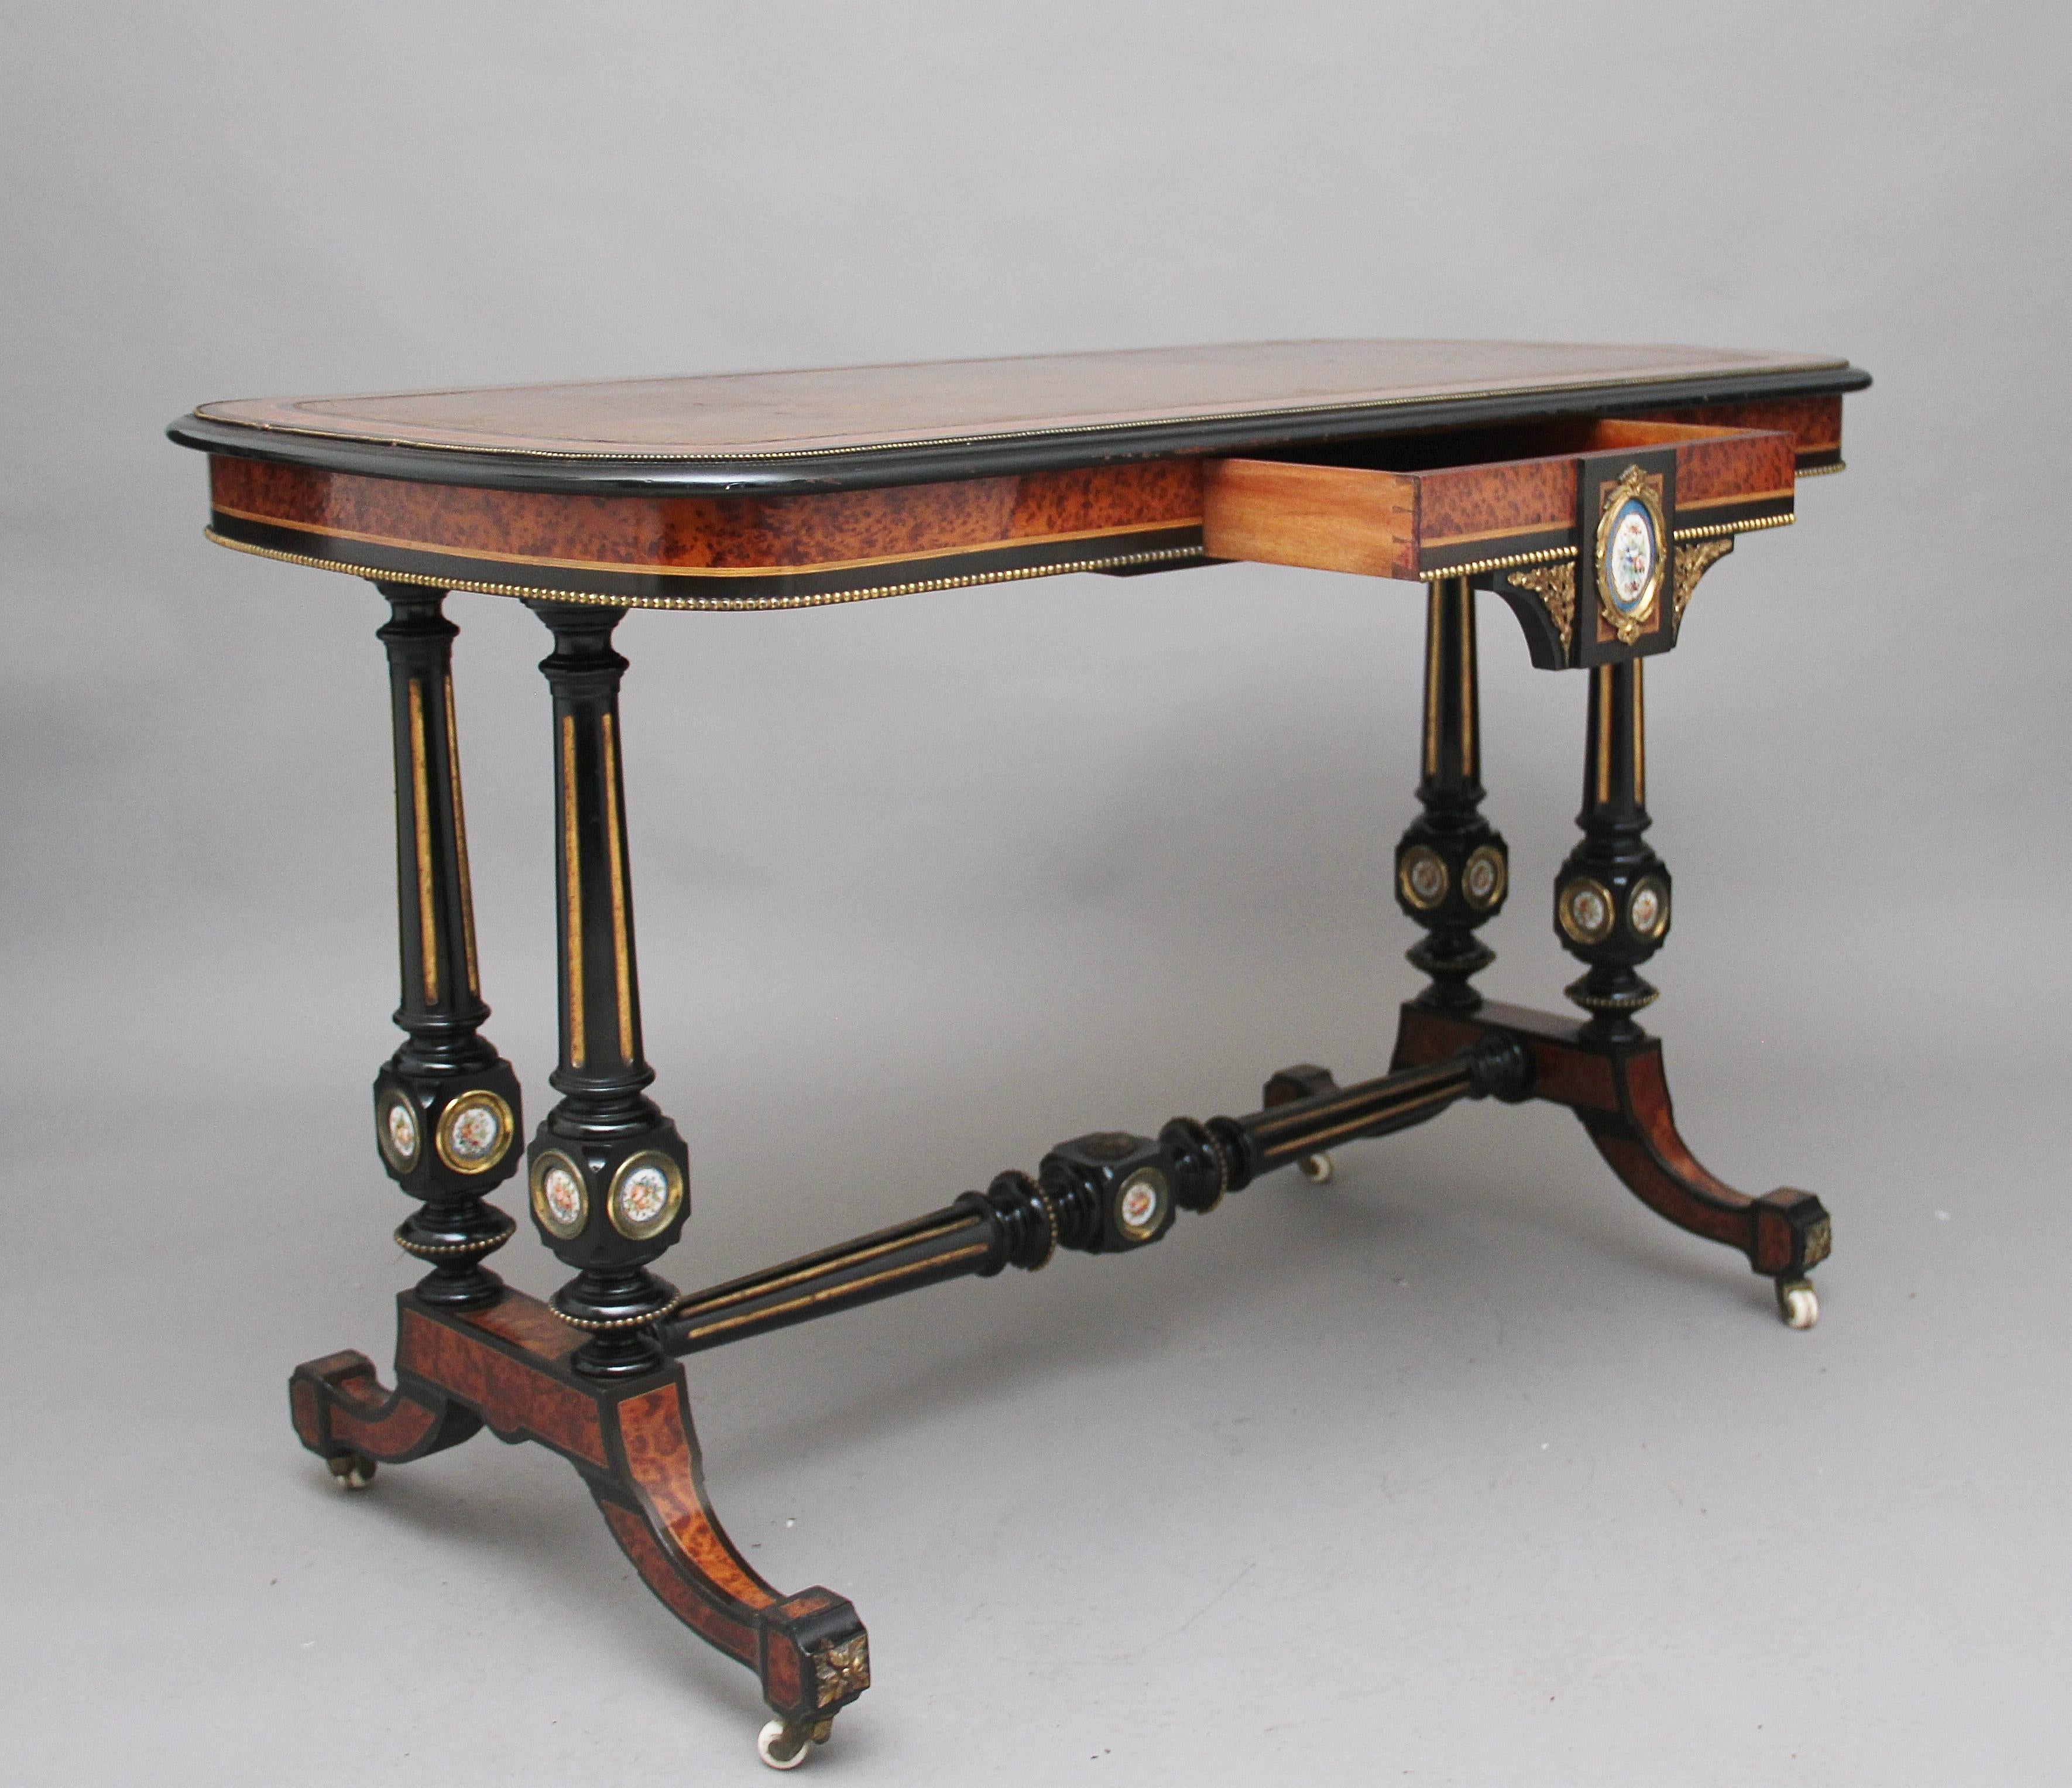 19th century amboyna and ebonised centre / sofa table, the rounded rectangular top with ormolu beading, ebonised edge and amboyna banding, with black leather top decorated with blind and gold tooling, the frieze below decorated with ormolu beading